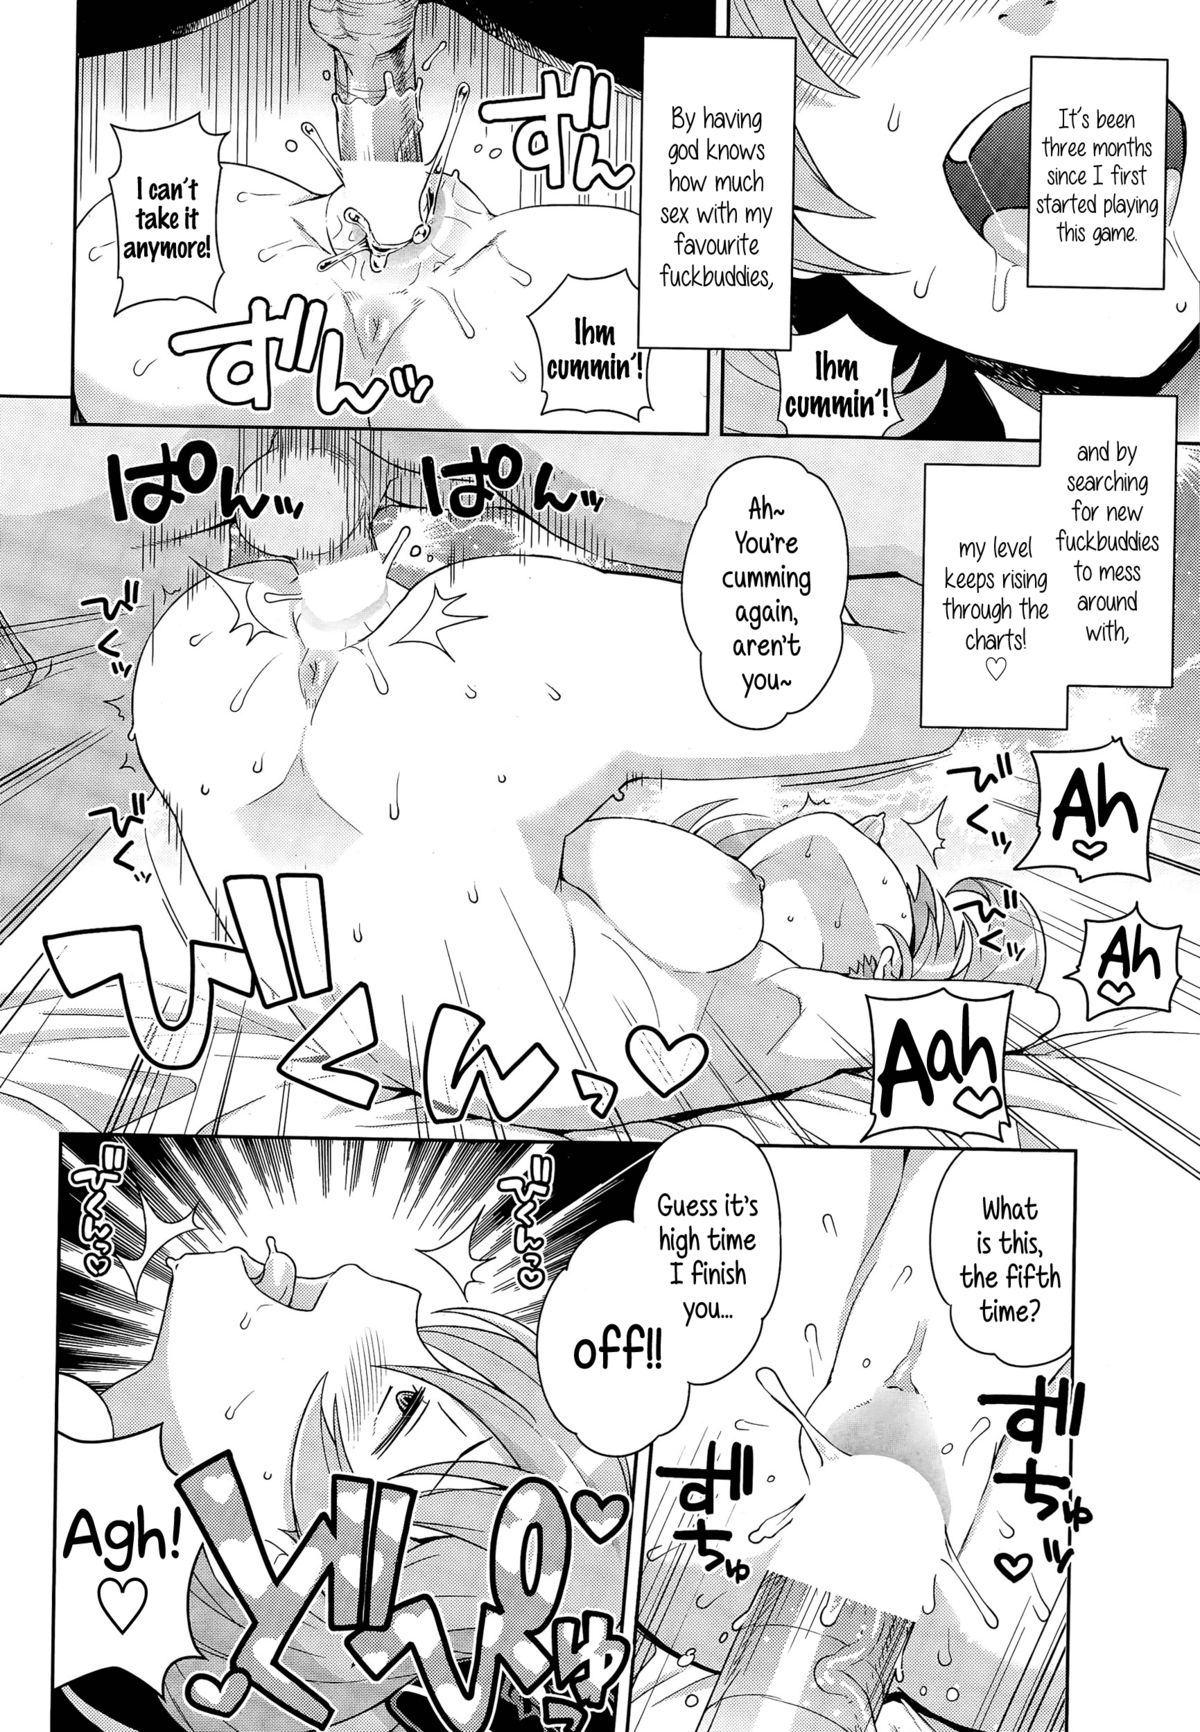 [Tamagoro] Hametomo Collection Ch. 1-2 | FuckBuddy Collection Ch. 1-2 [English] {5 a.m.} page 20 full